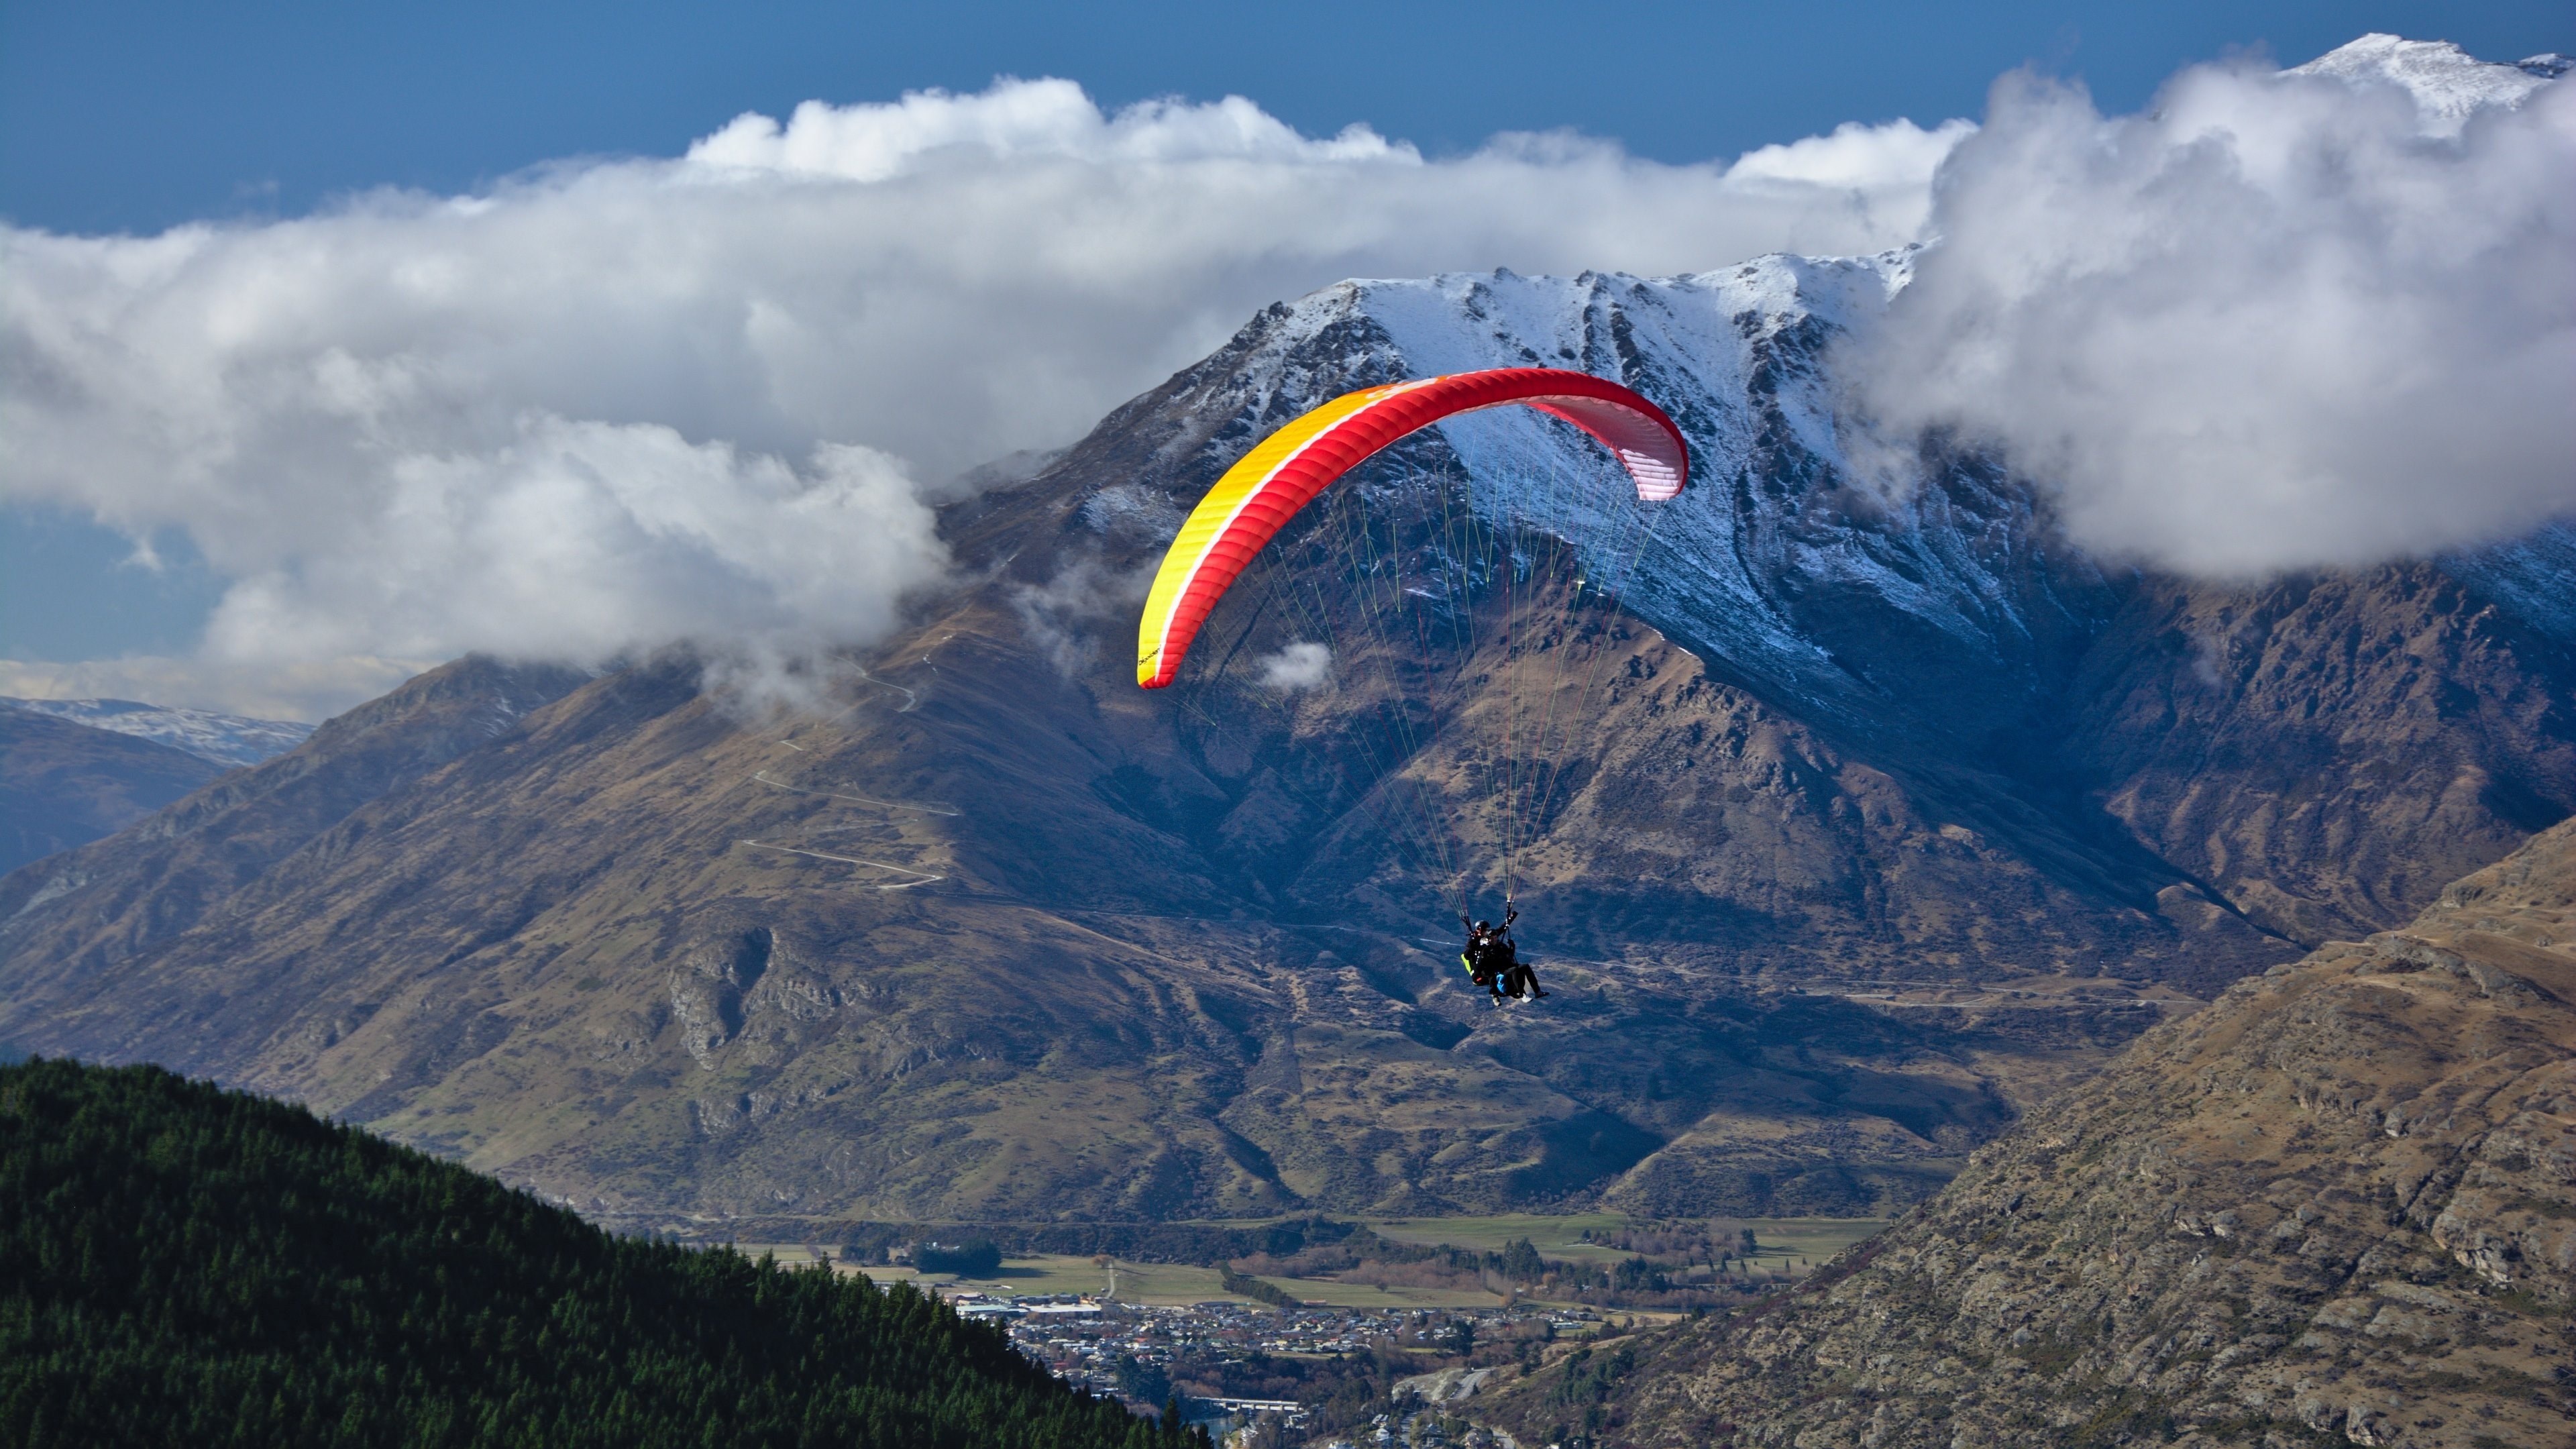 Paragliding: Ram-air airfoil, Parachute as a wing, Gliding in the mountains. 3840x2160 4K Background.